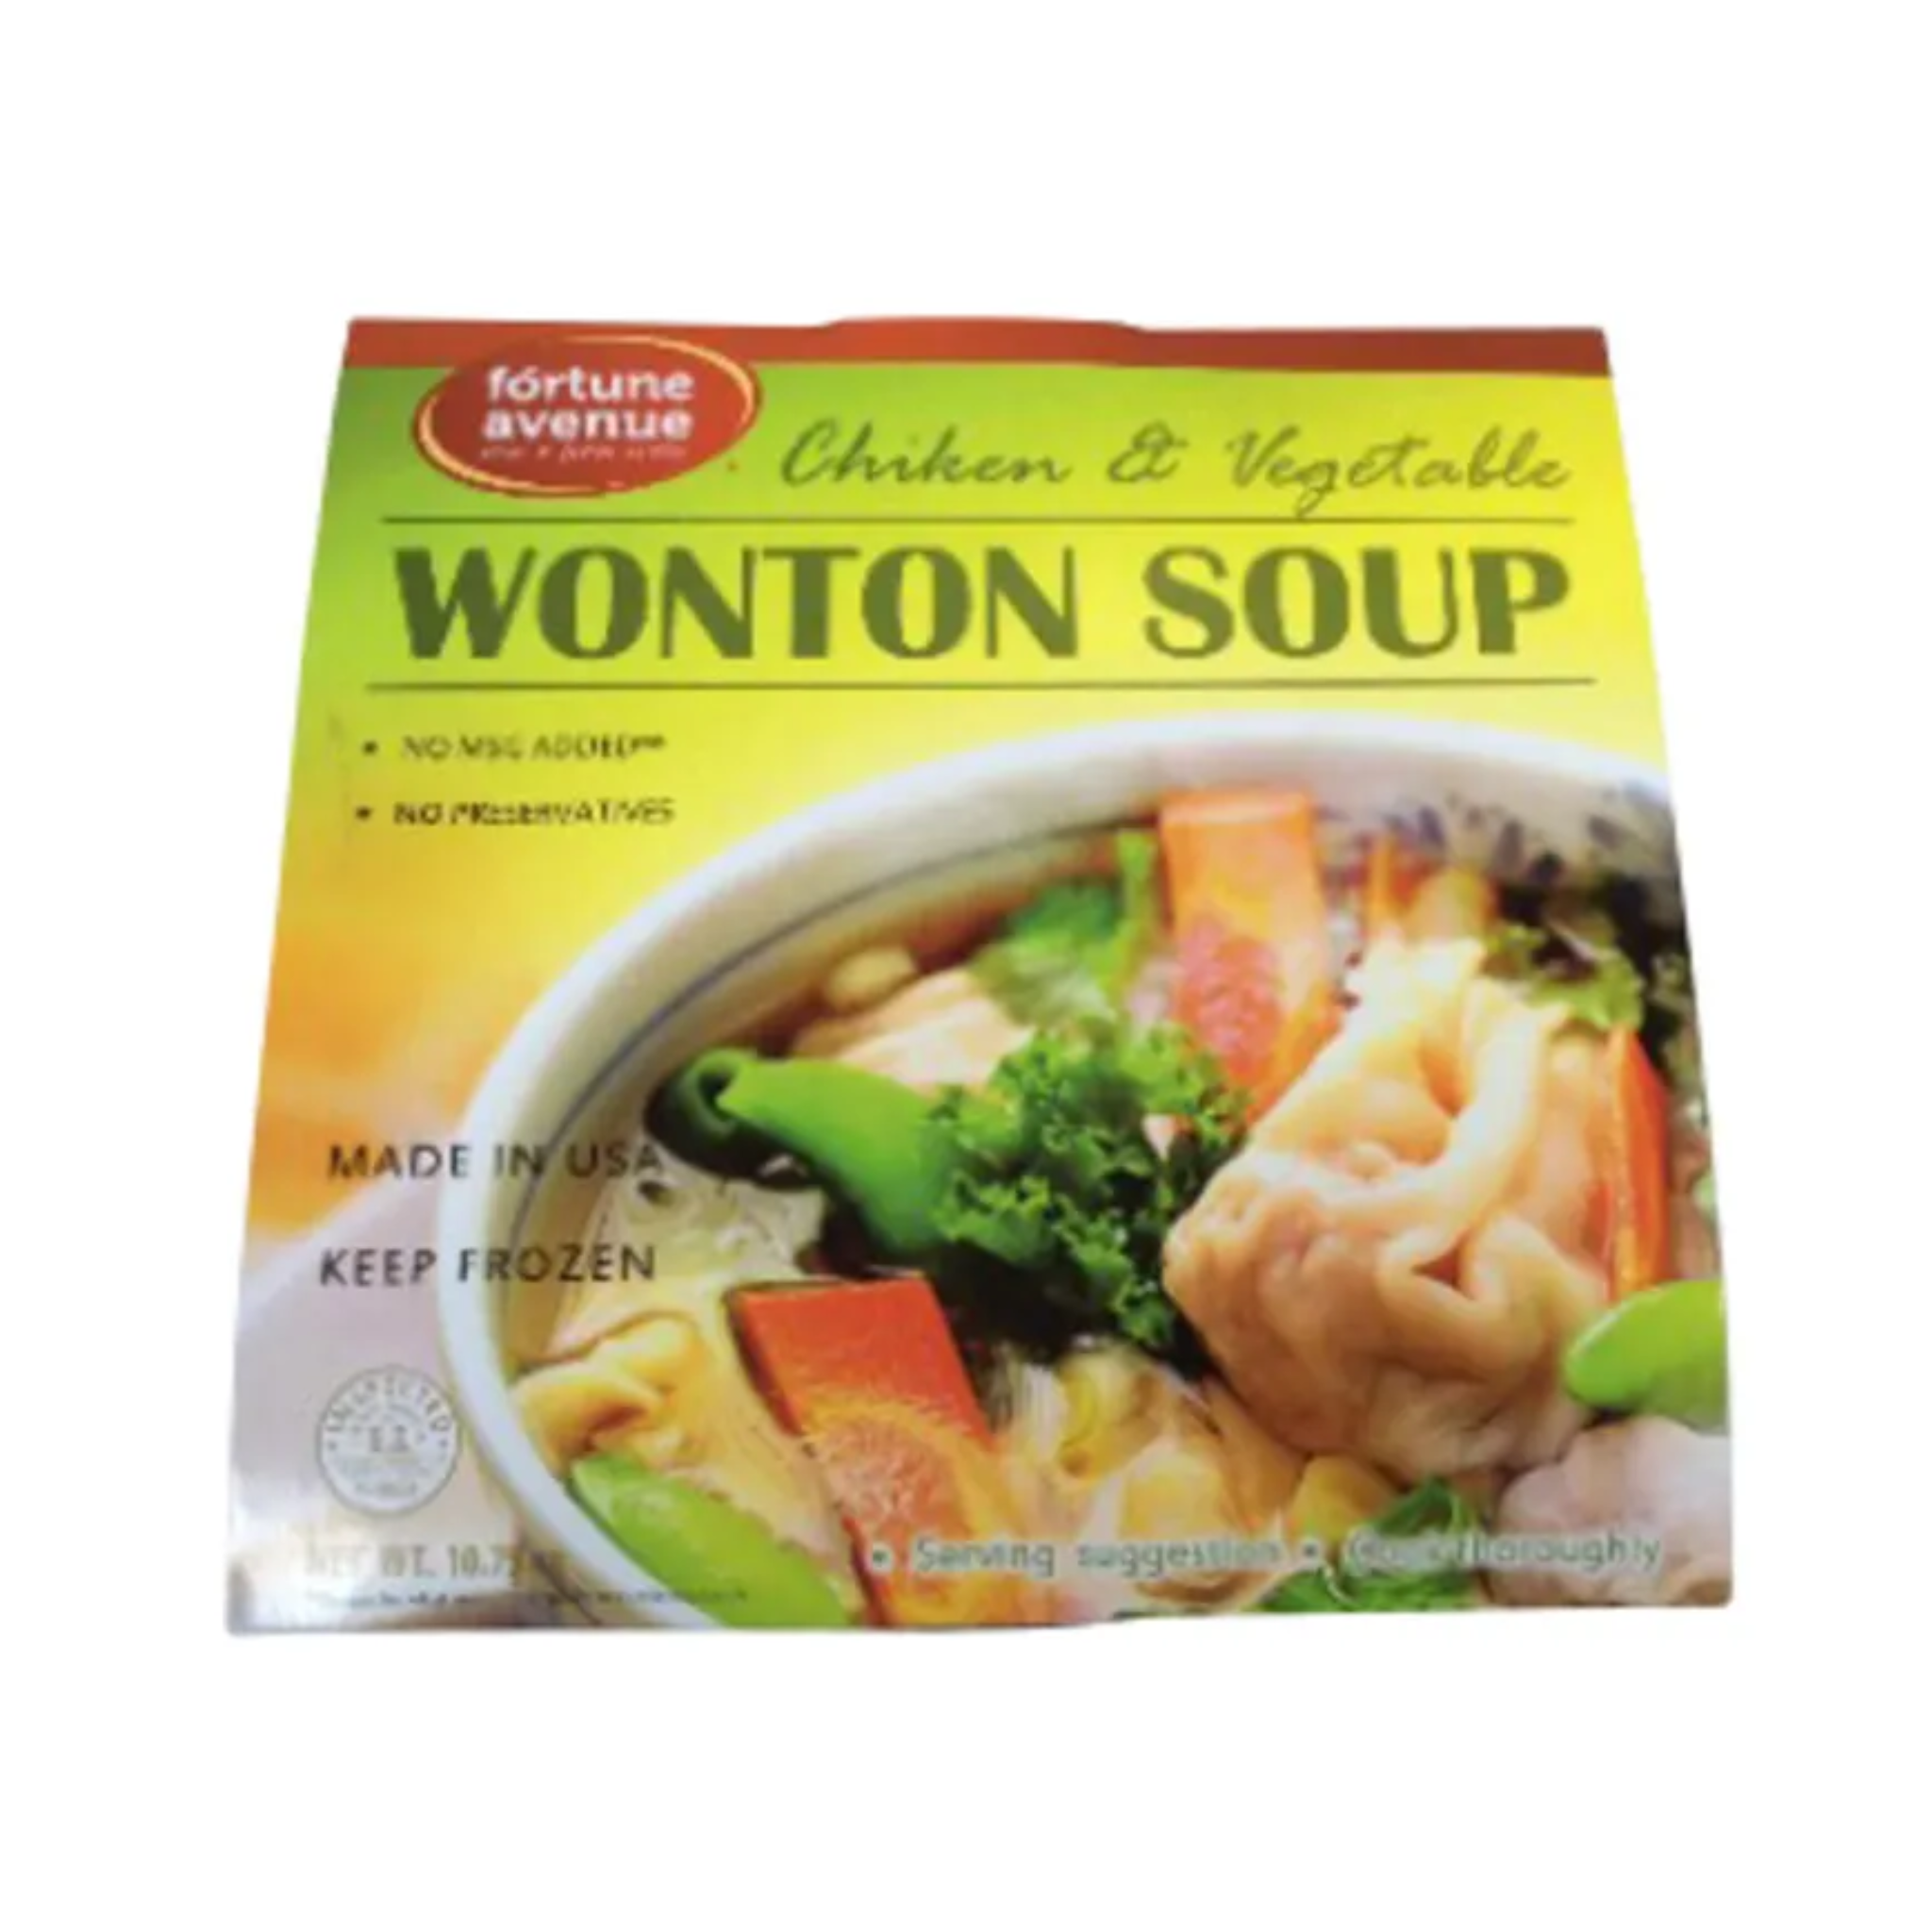 Fortune Ave Chicken & Vegetable Wonton Soup